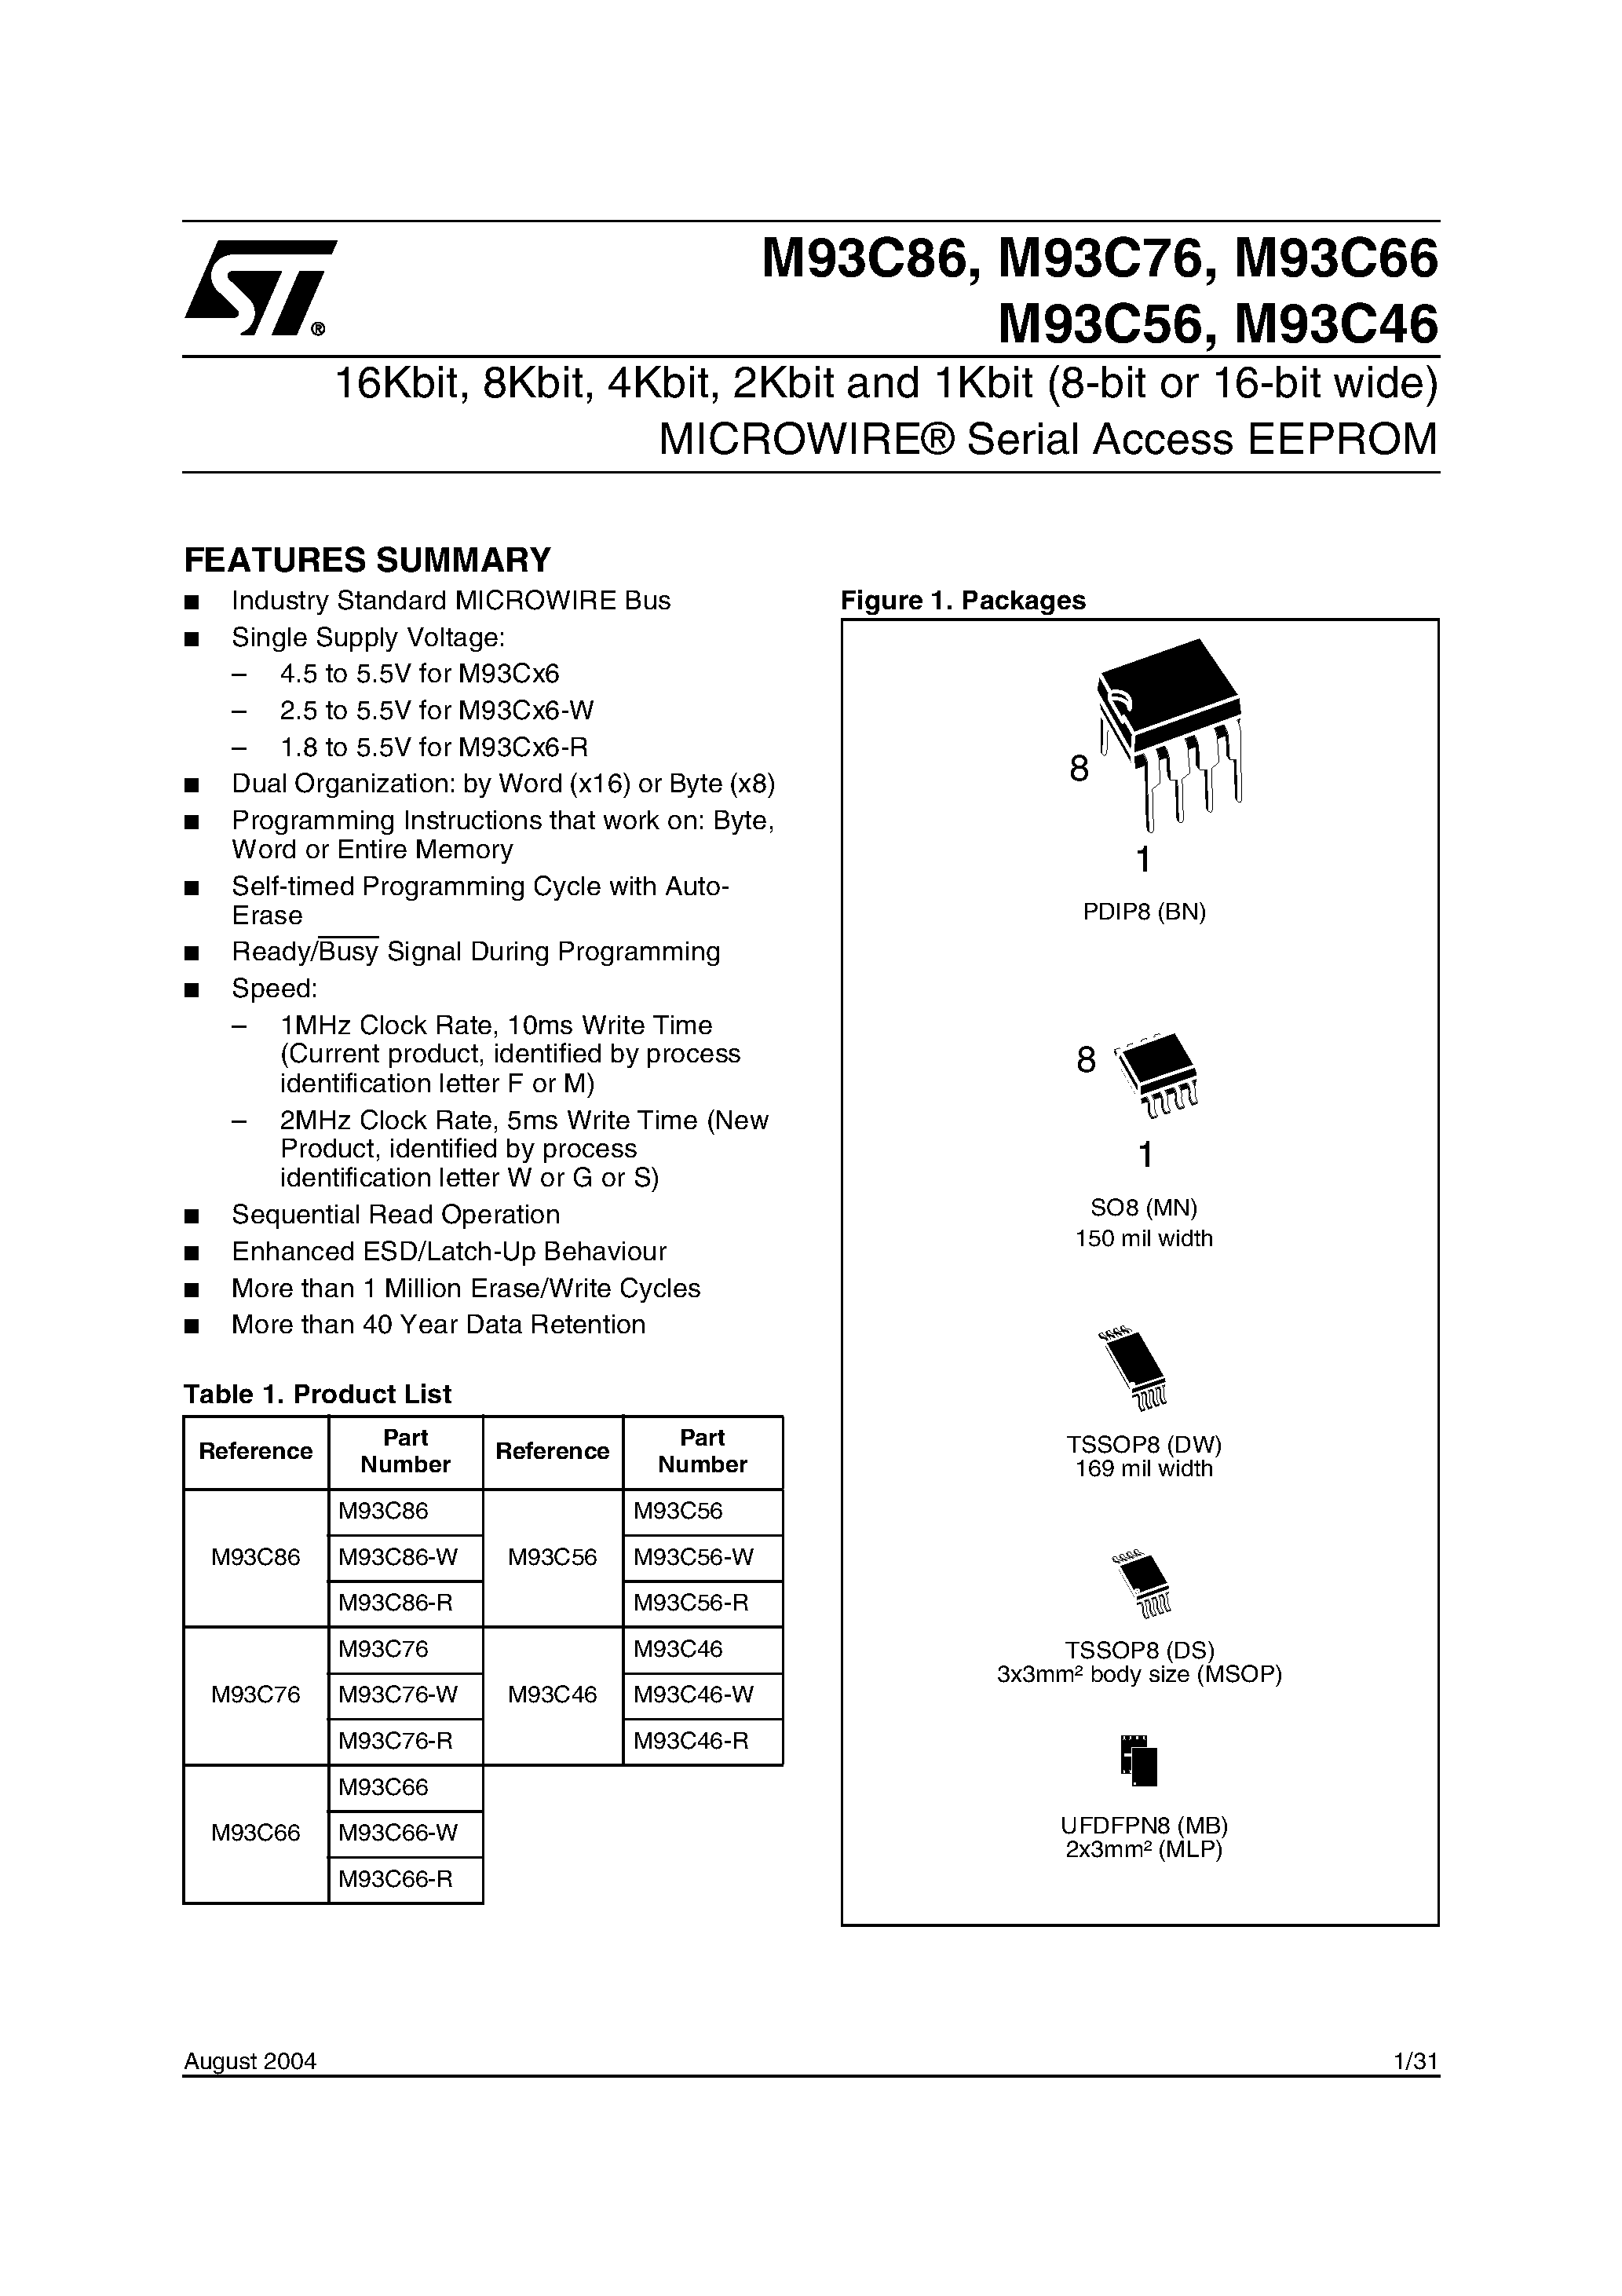 Datasheet M93C06 - 16Kbit / 8Kbit / 4Kbit / 2Kbit / 1Kbit and 256bit 8-bit or 16-bit wide page 1